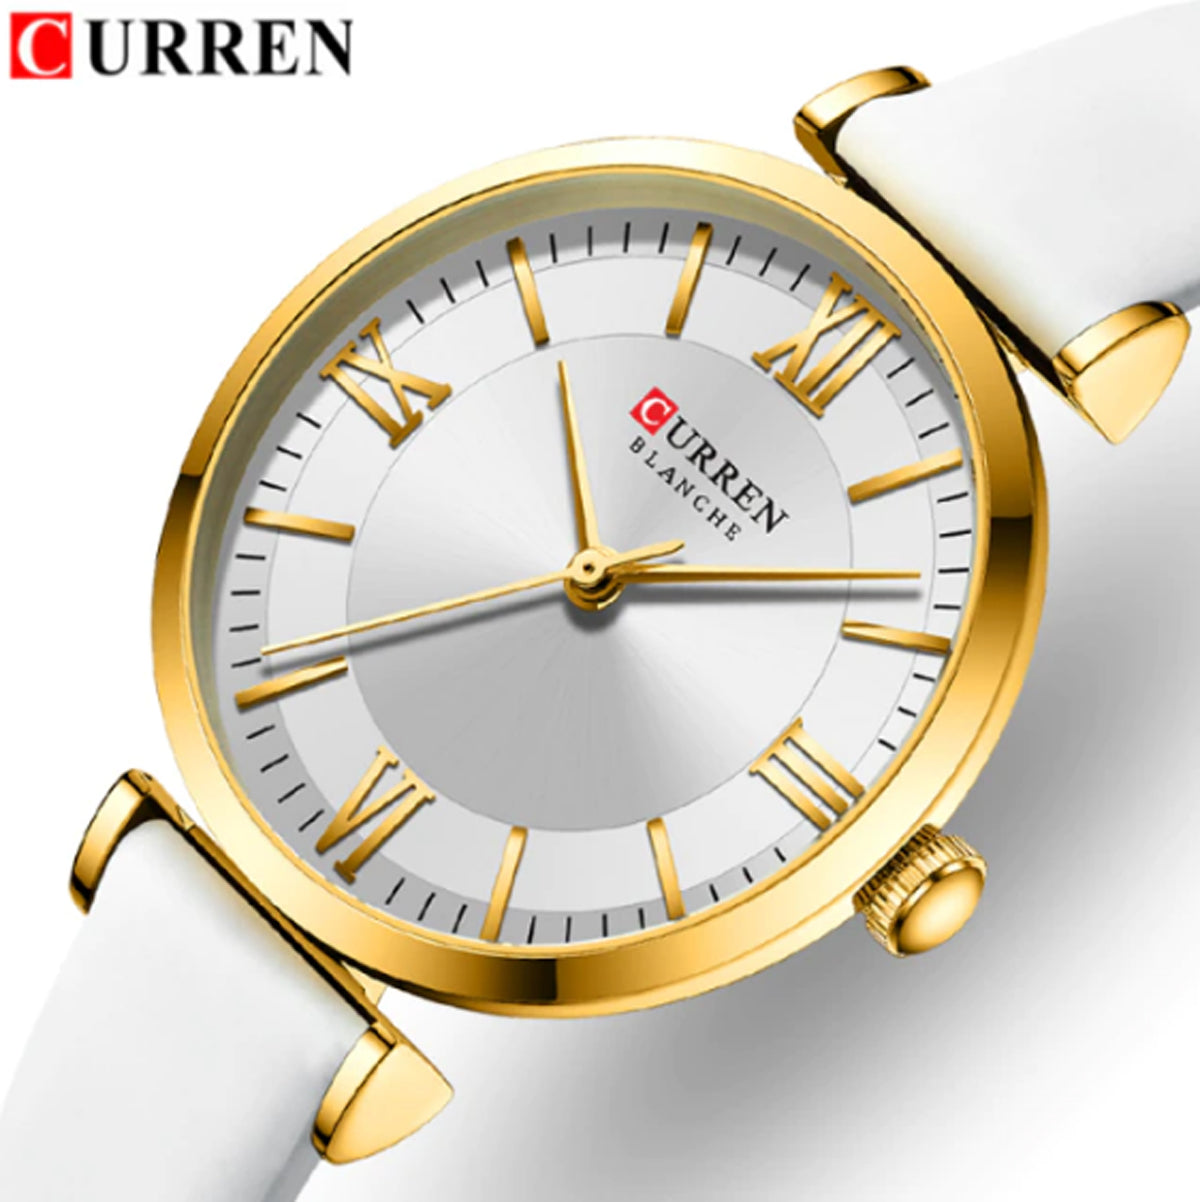 CURREN Original Brand Leather Straps Wrist Watch For Women With Brand (Box & Bag)-9079